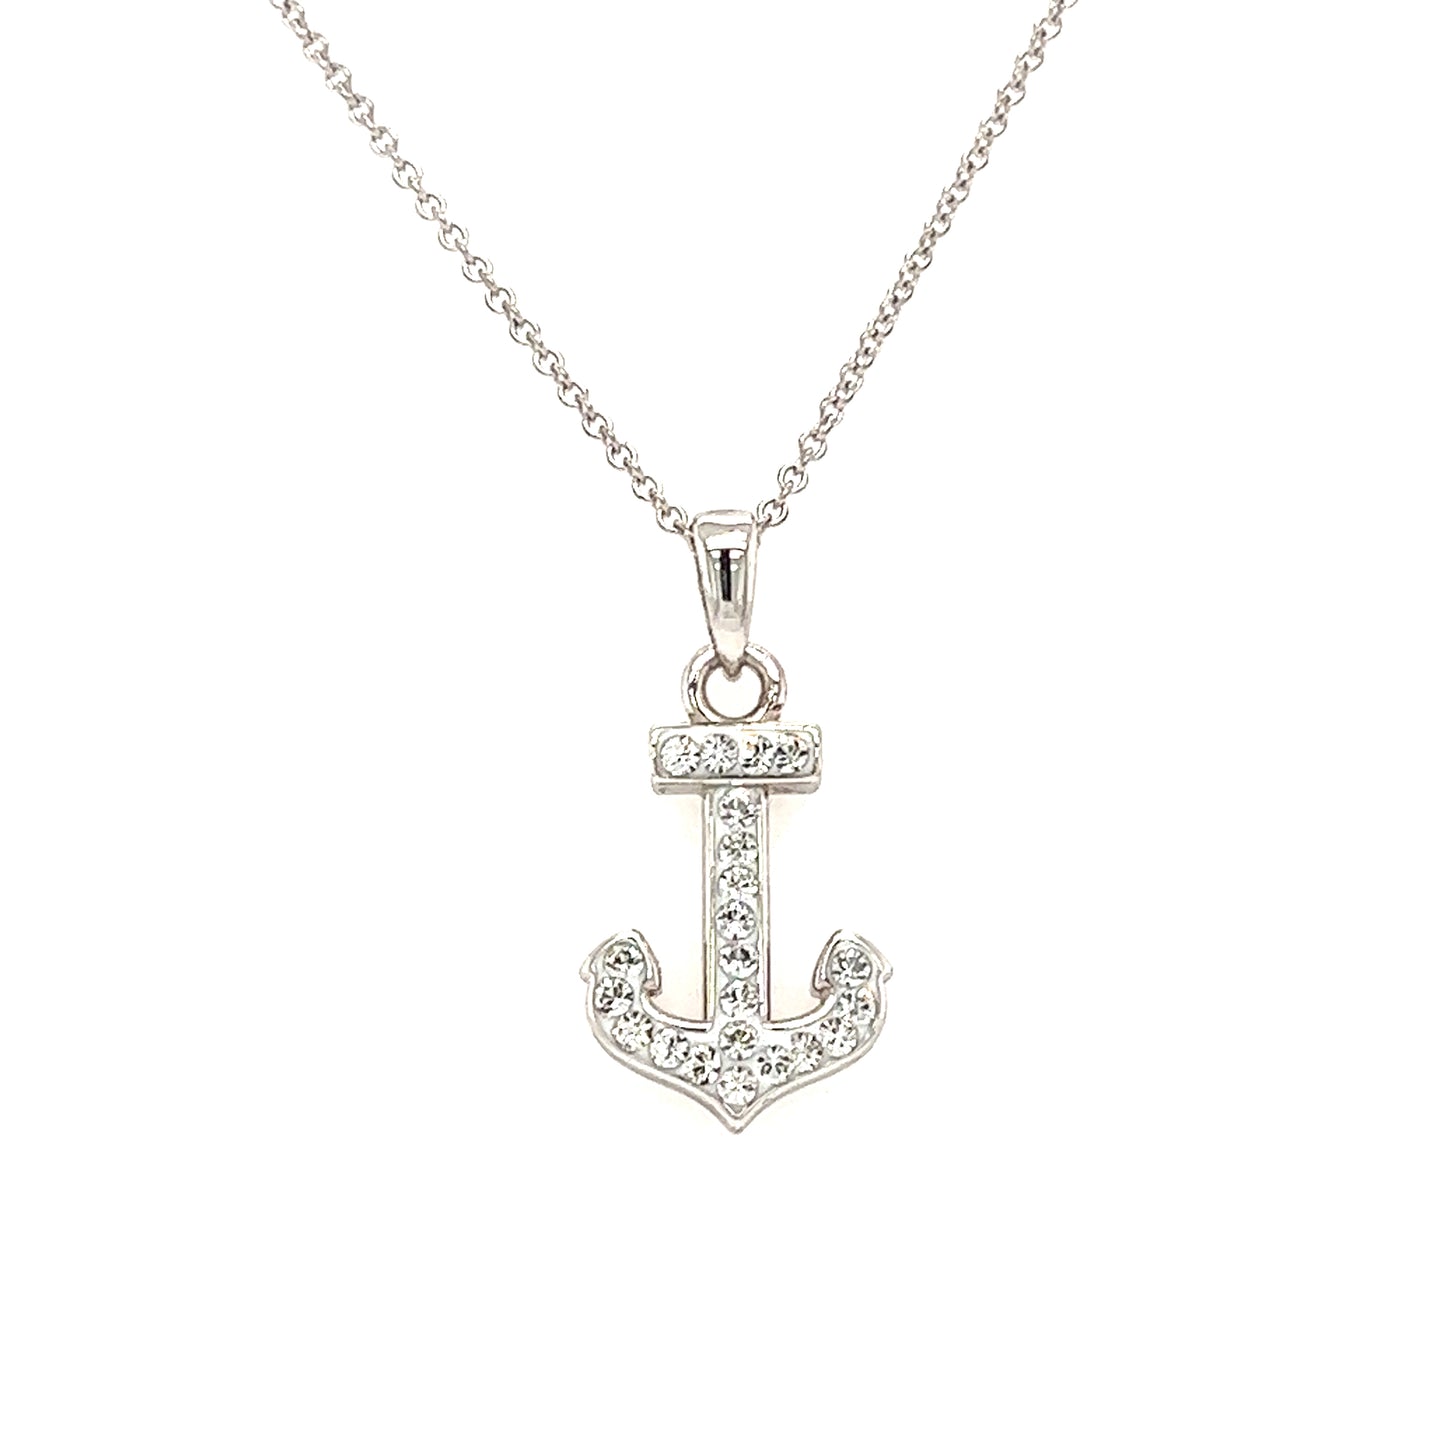 Anchor Necklace with White Crystals in Sterling Silver Necklace Front View 2